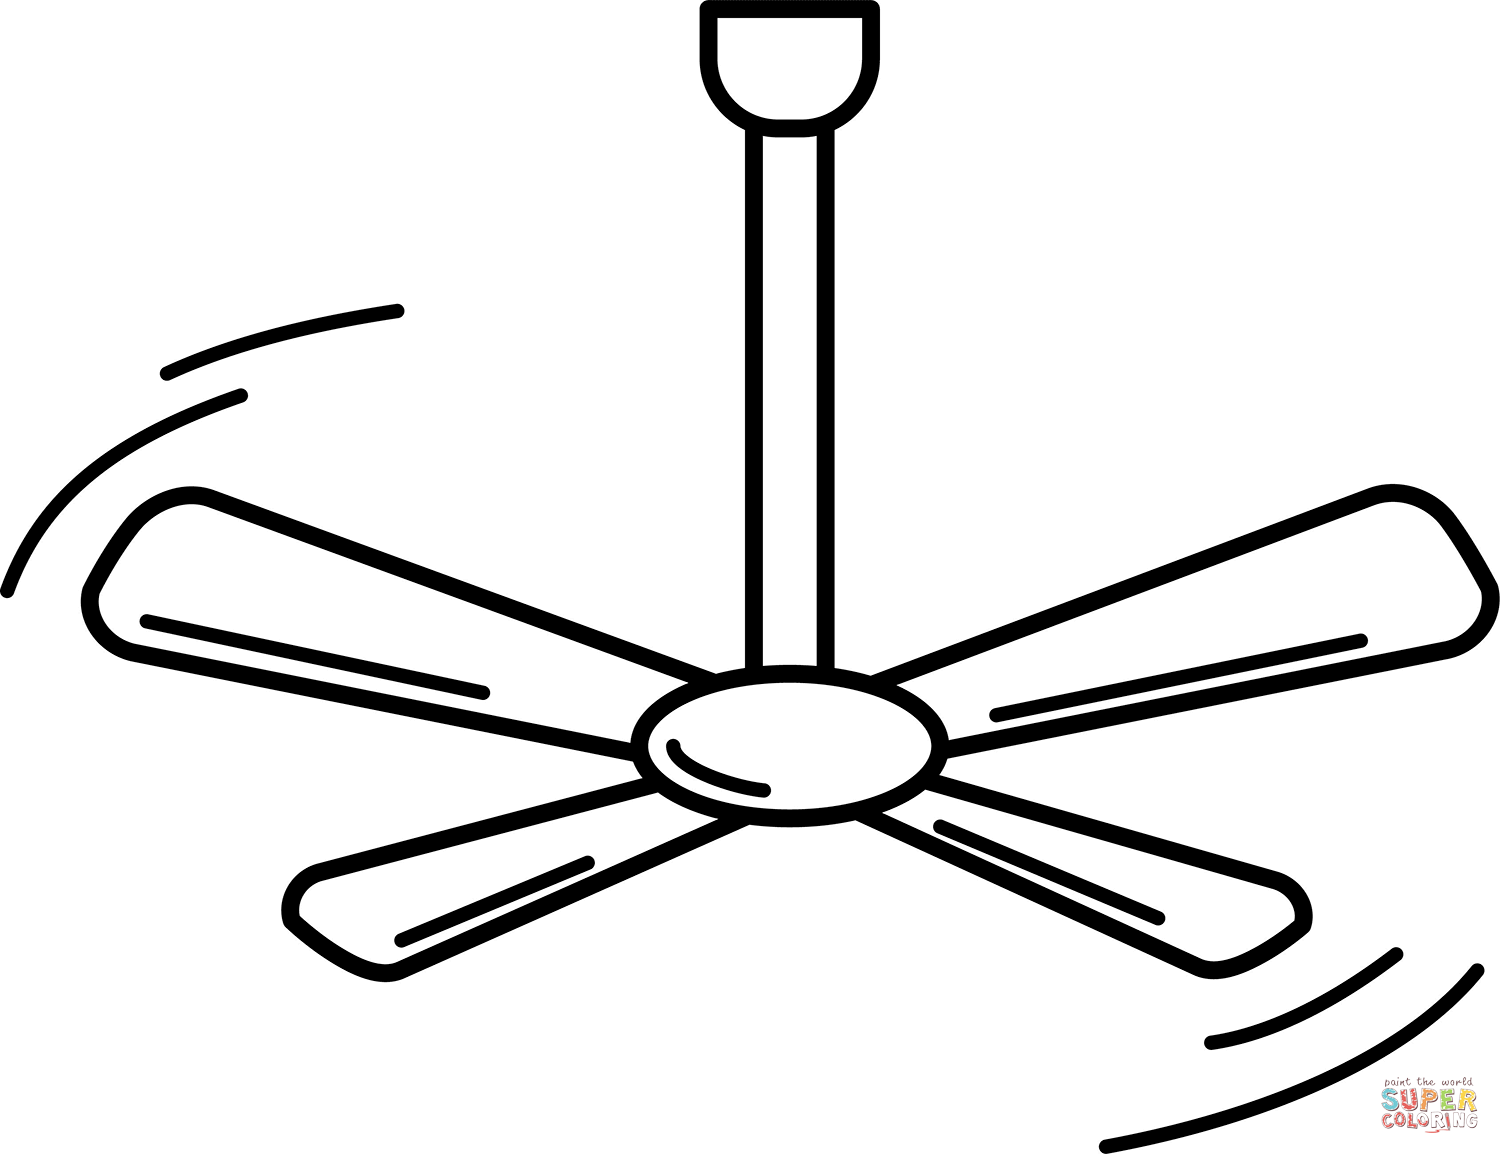 Ceiling fan coloring page free printable coloring pages